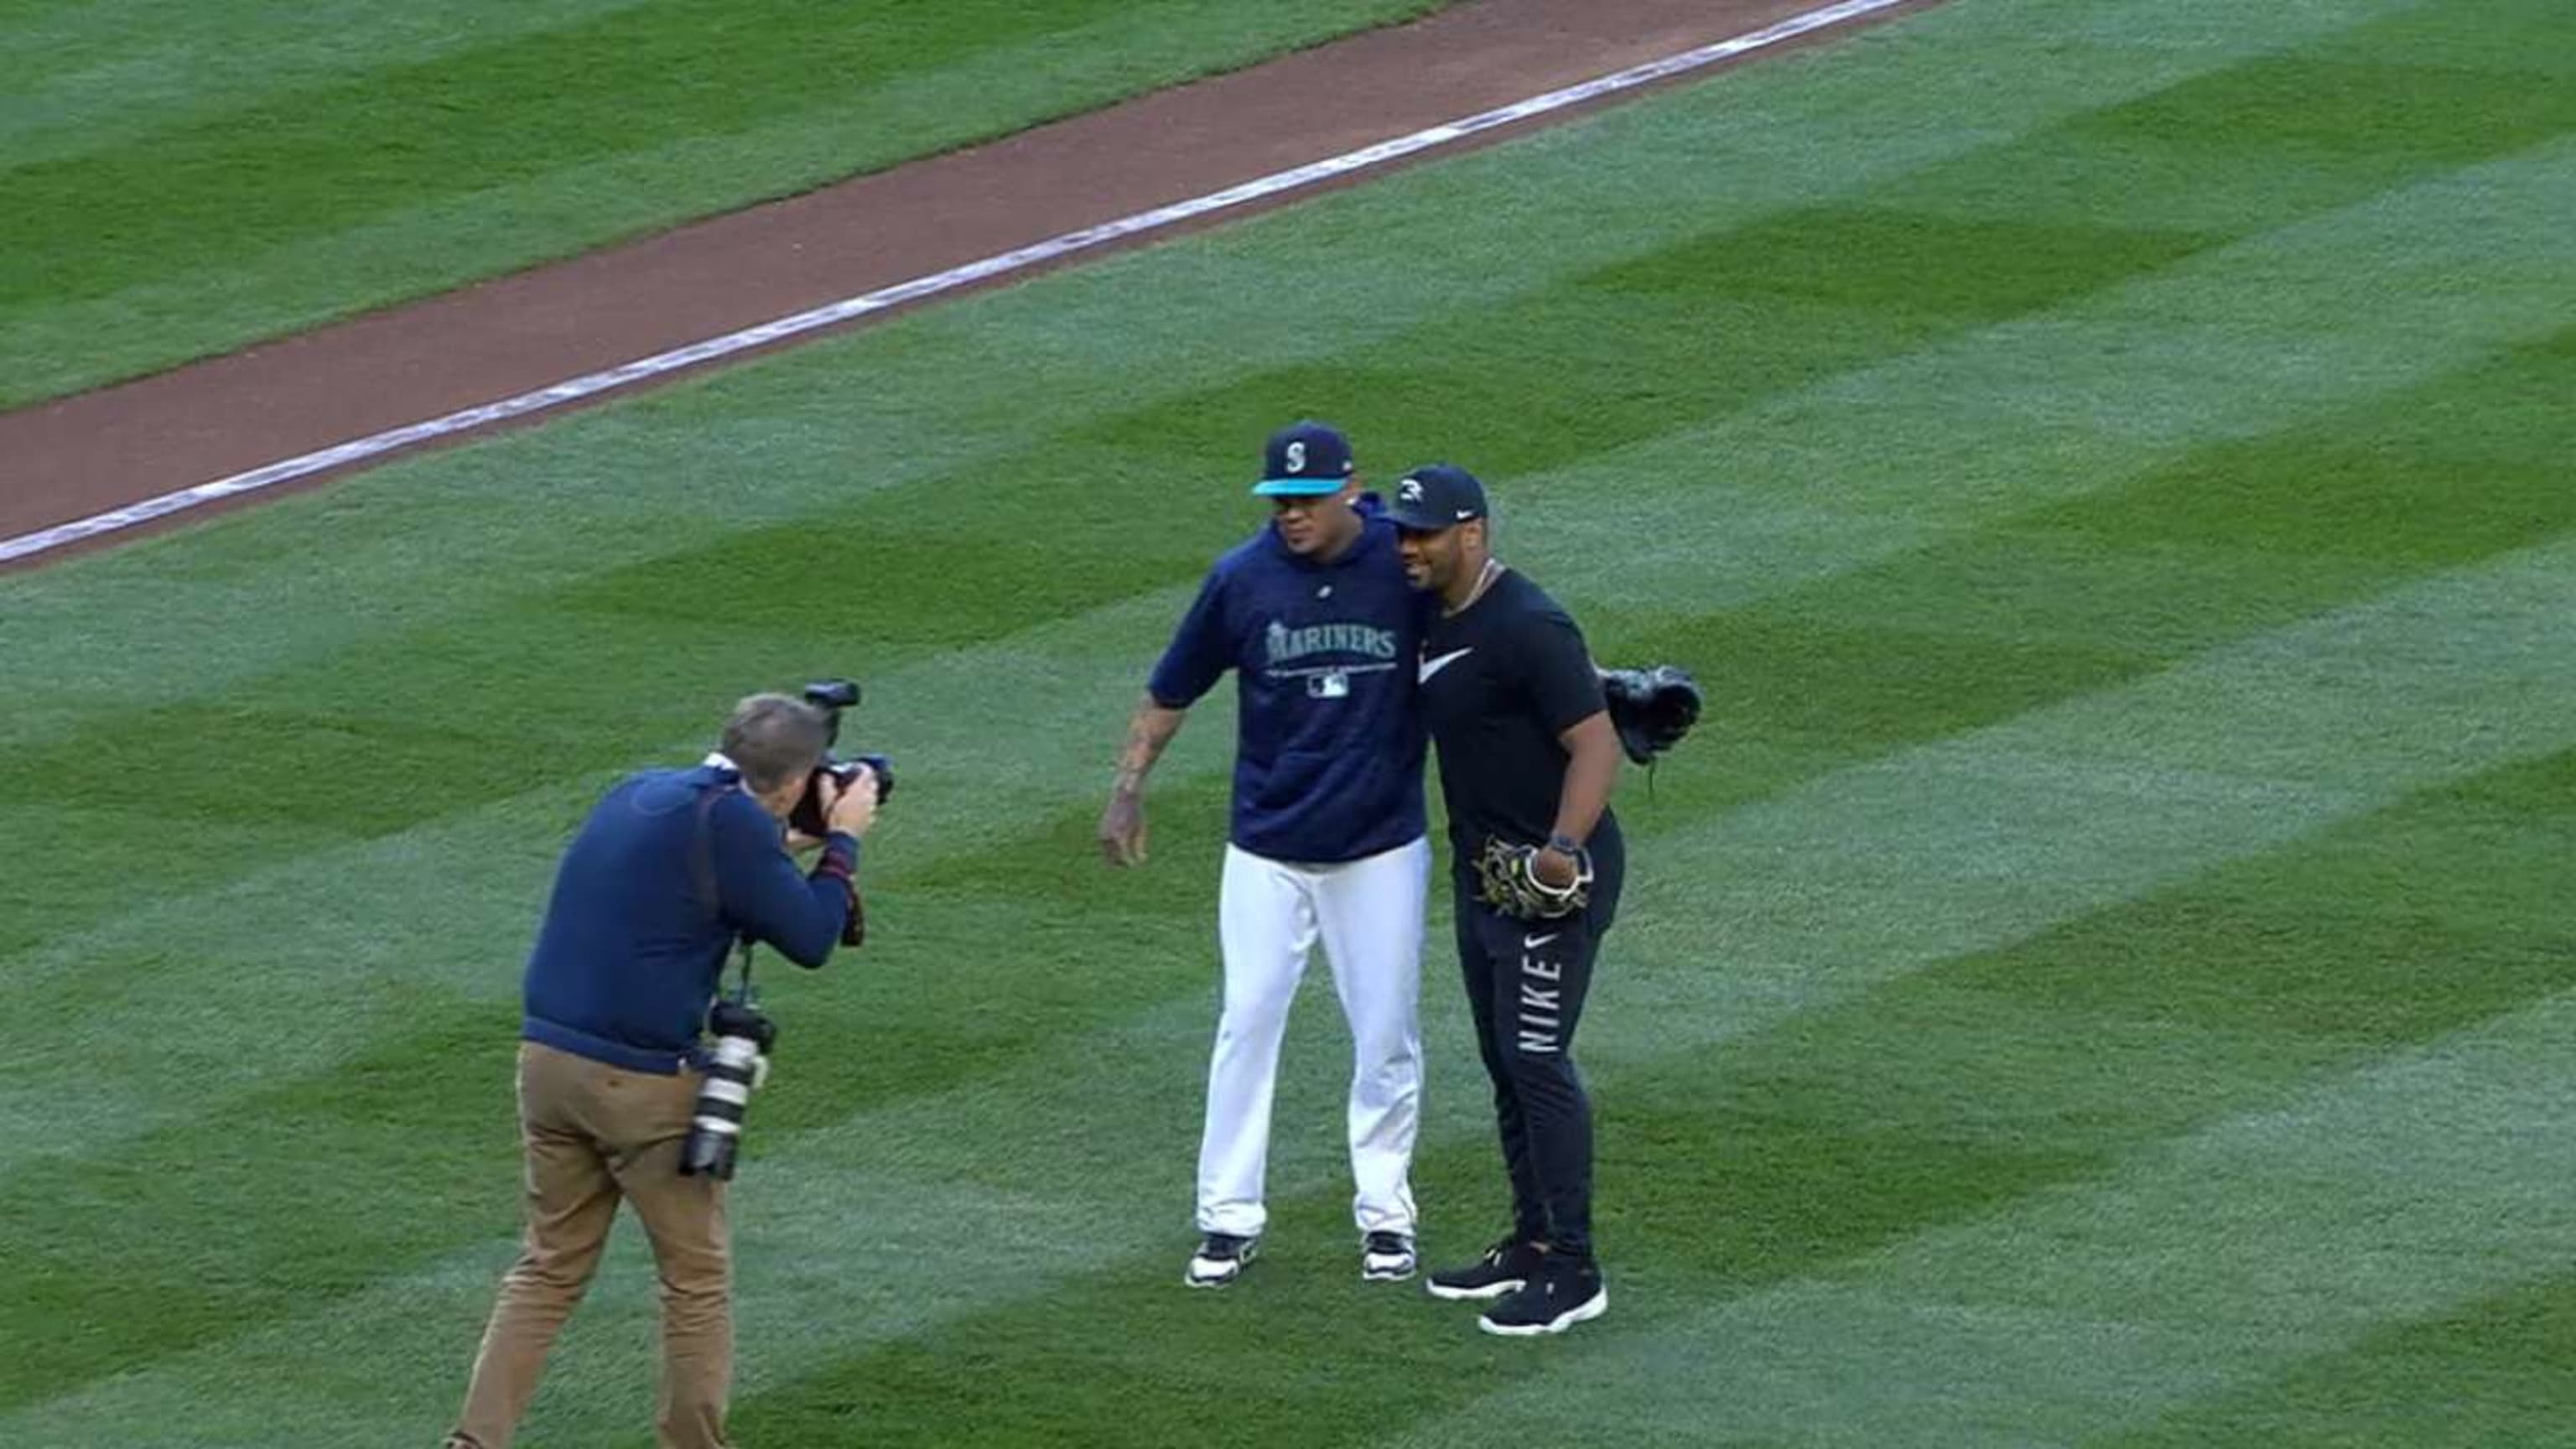 Yankees Minor Leaguer Russell Wilson threw out the ceremonial first pitch  at the Mariners game